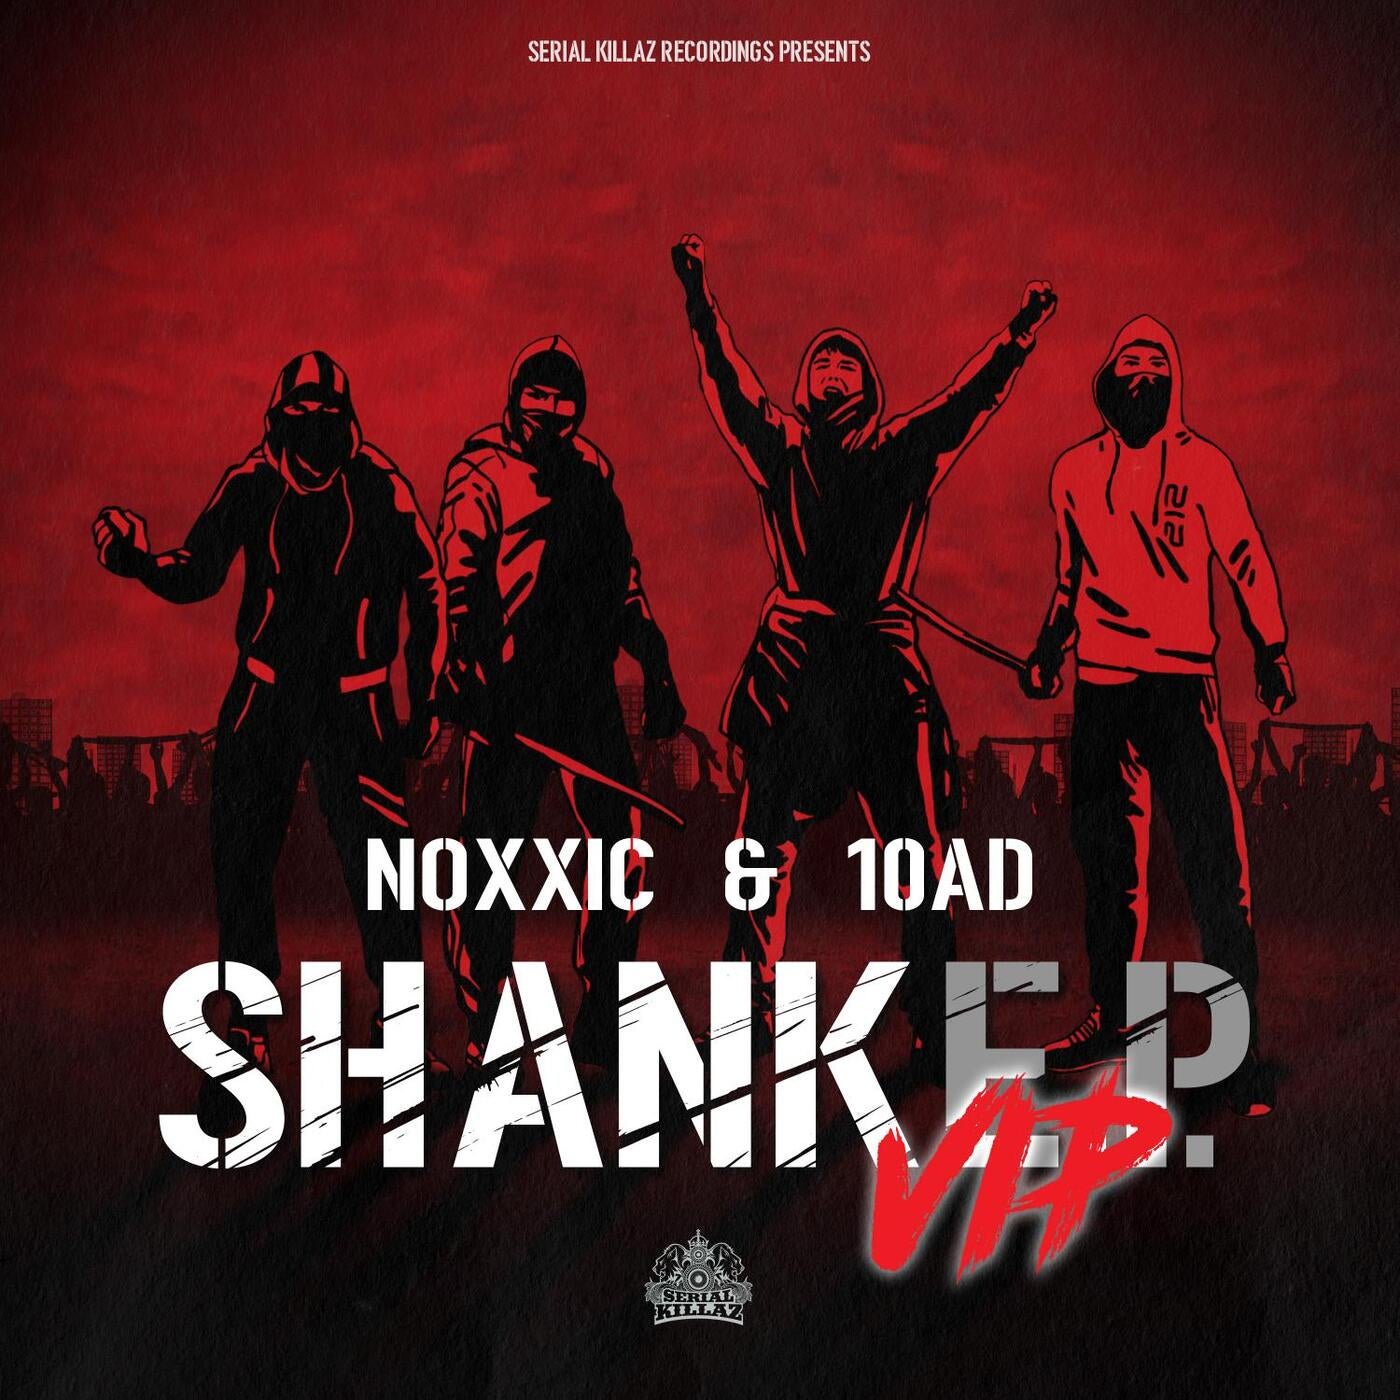 10ad Noxxic Shank Vip Ep Serial Killaz Music And Downloads On Beatport 9082